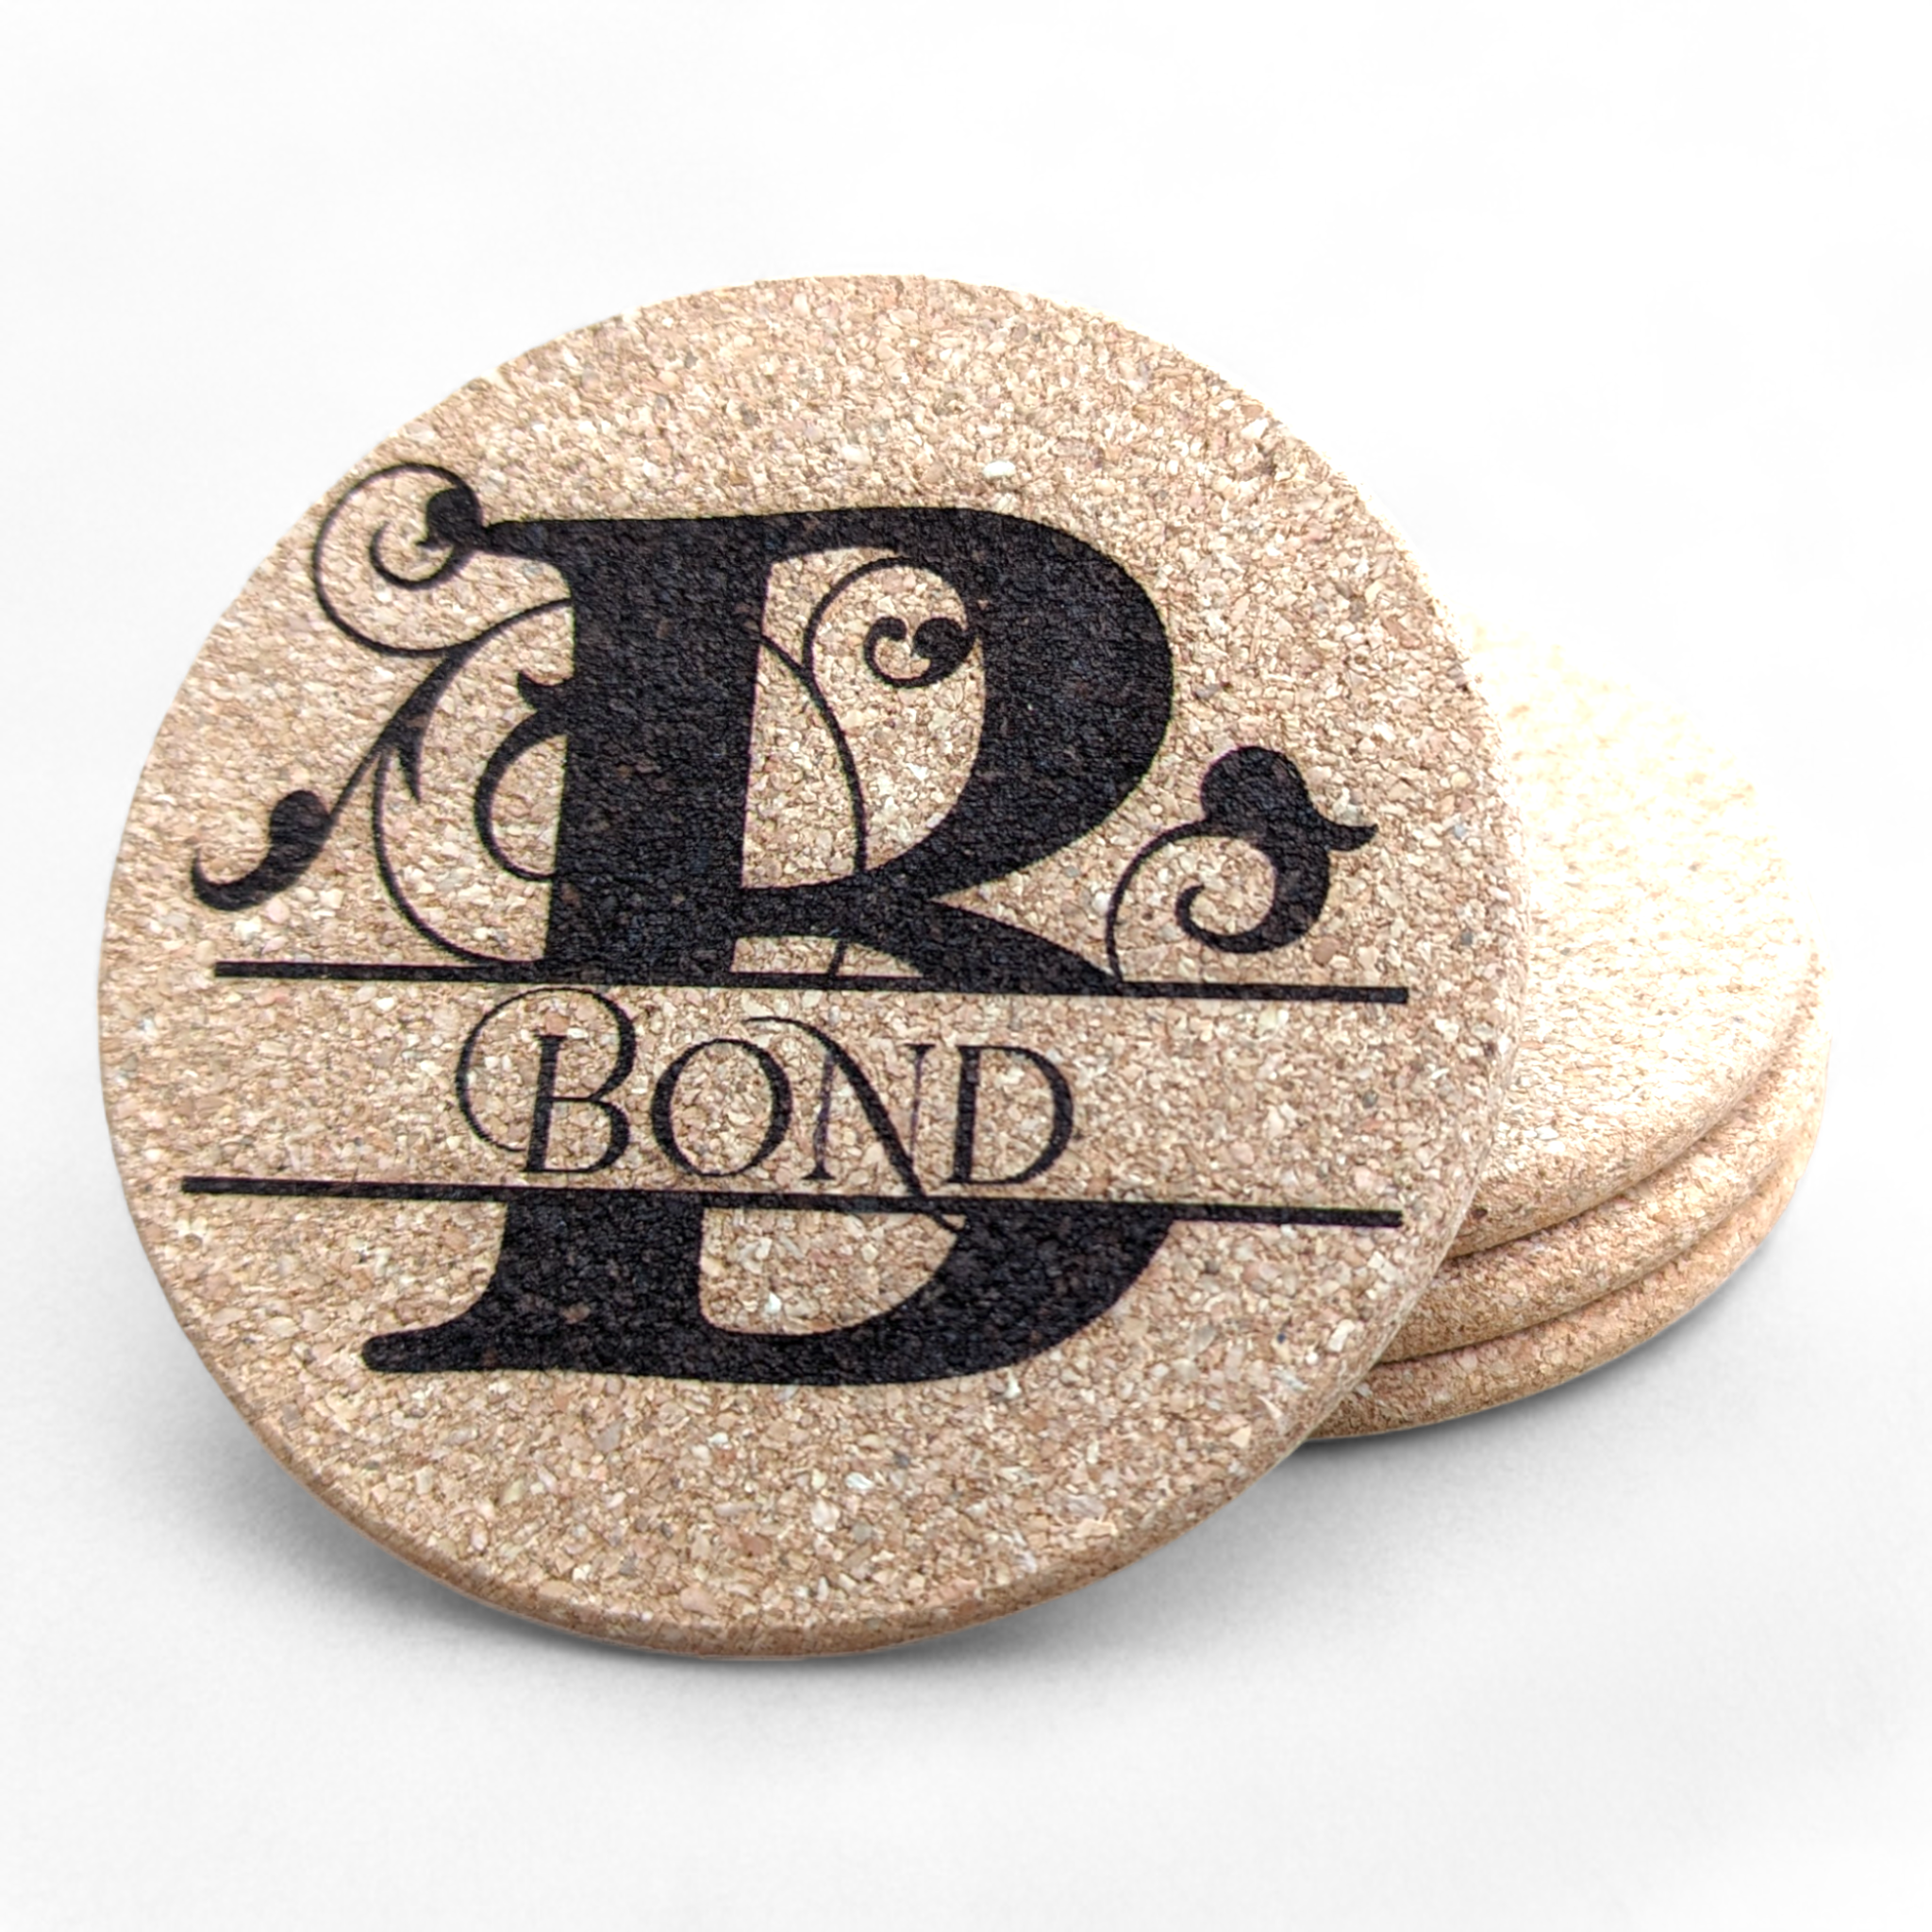 Personalized Cork Coasters (set of 4)